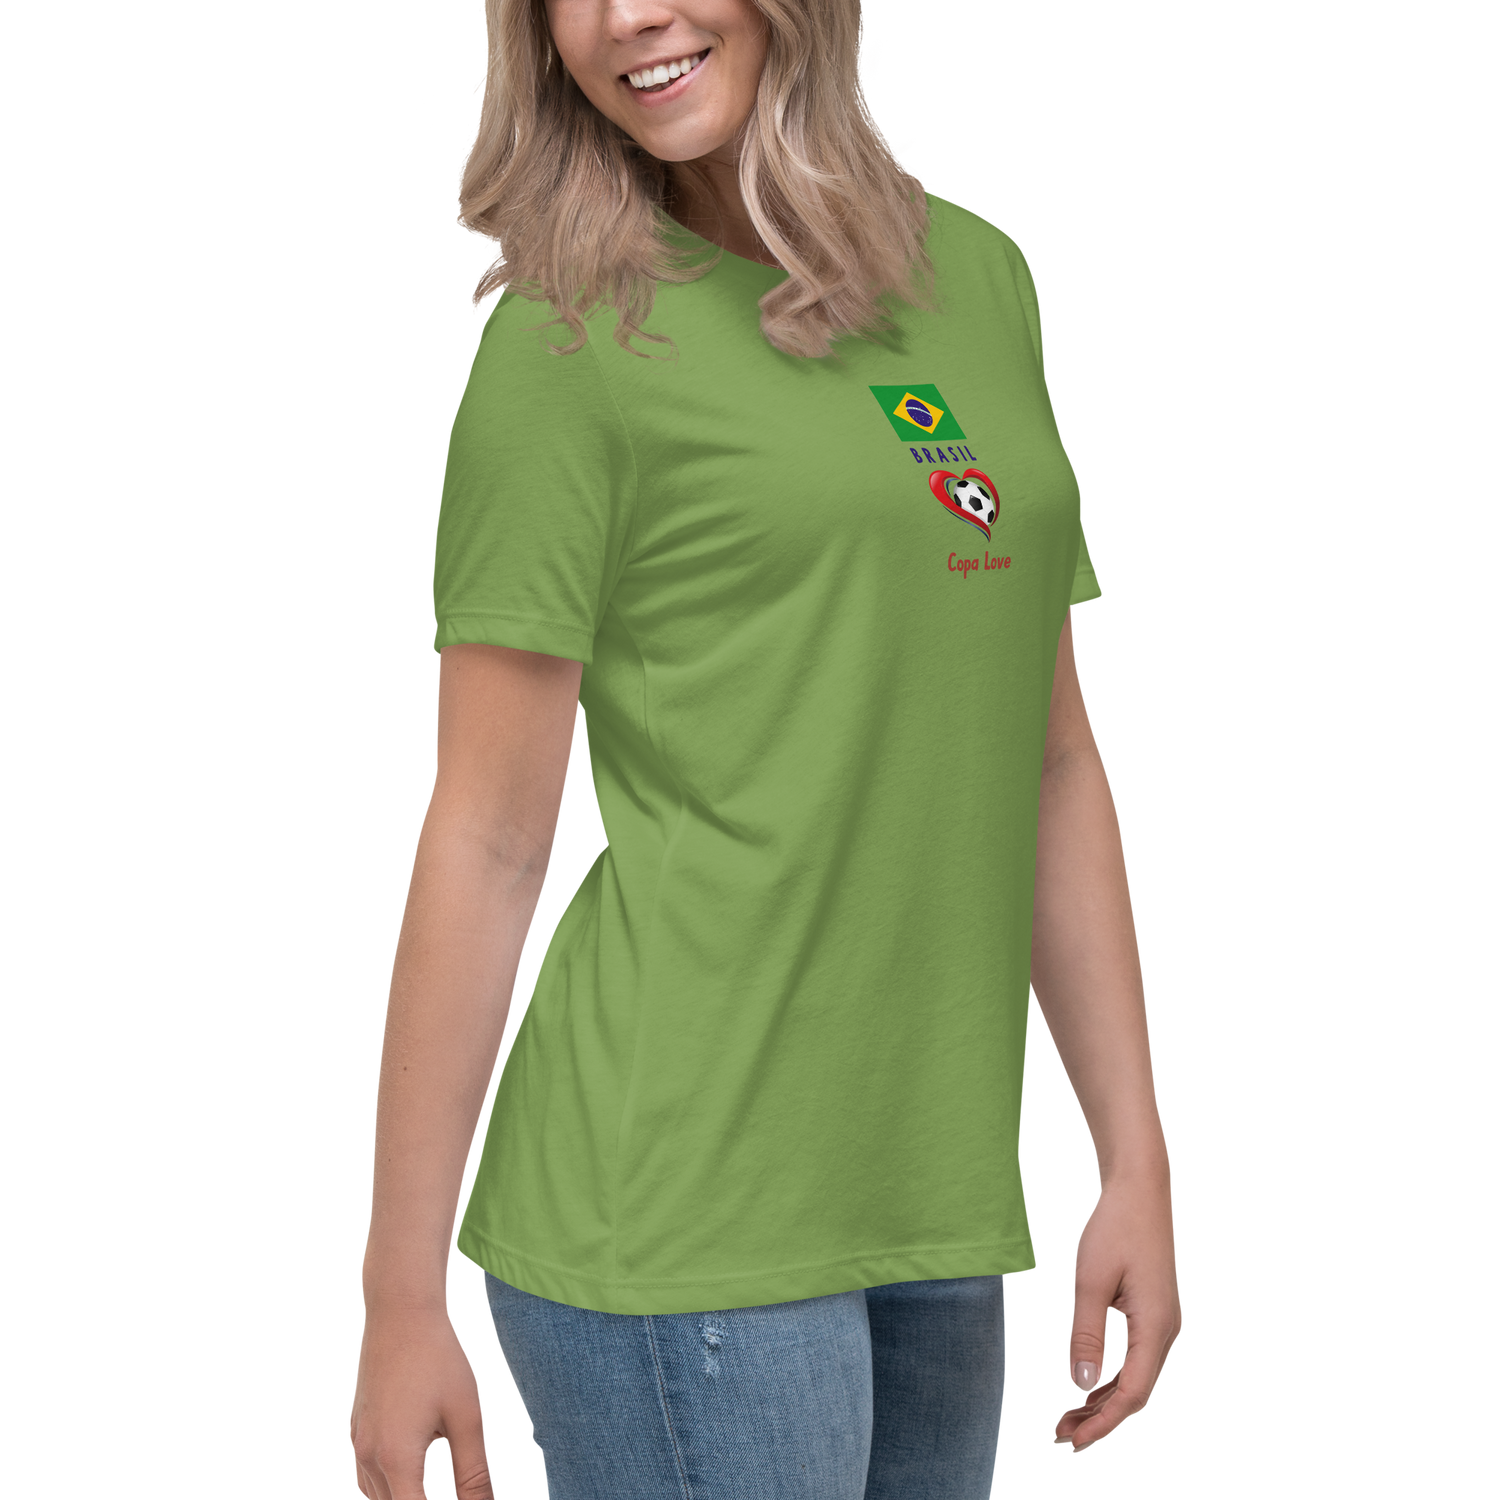 BRASIL - Love your team with our exclusive women's shirt